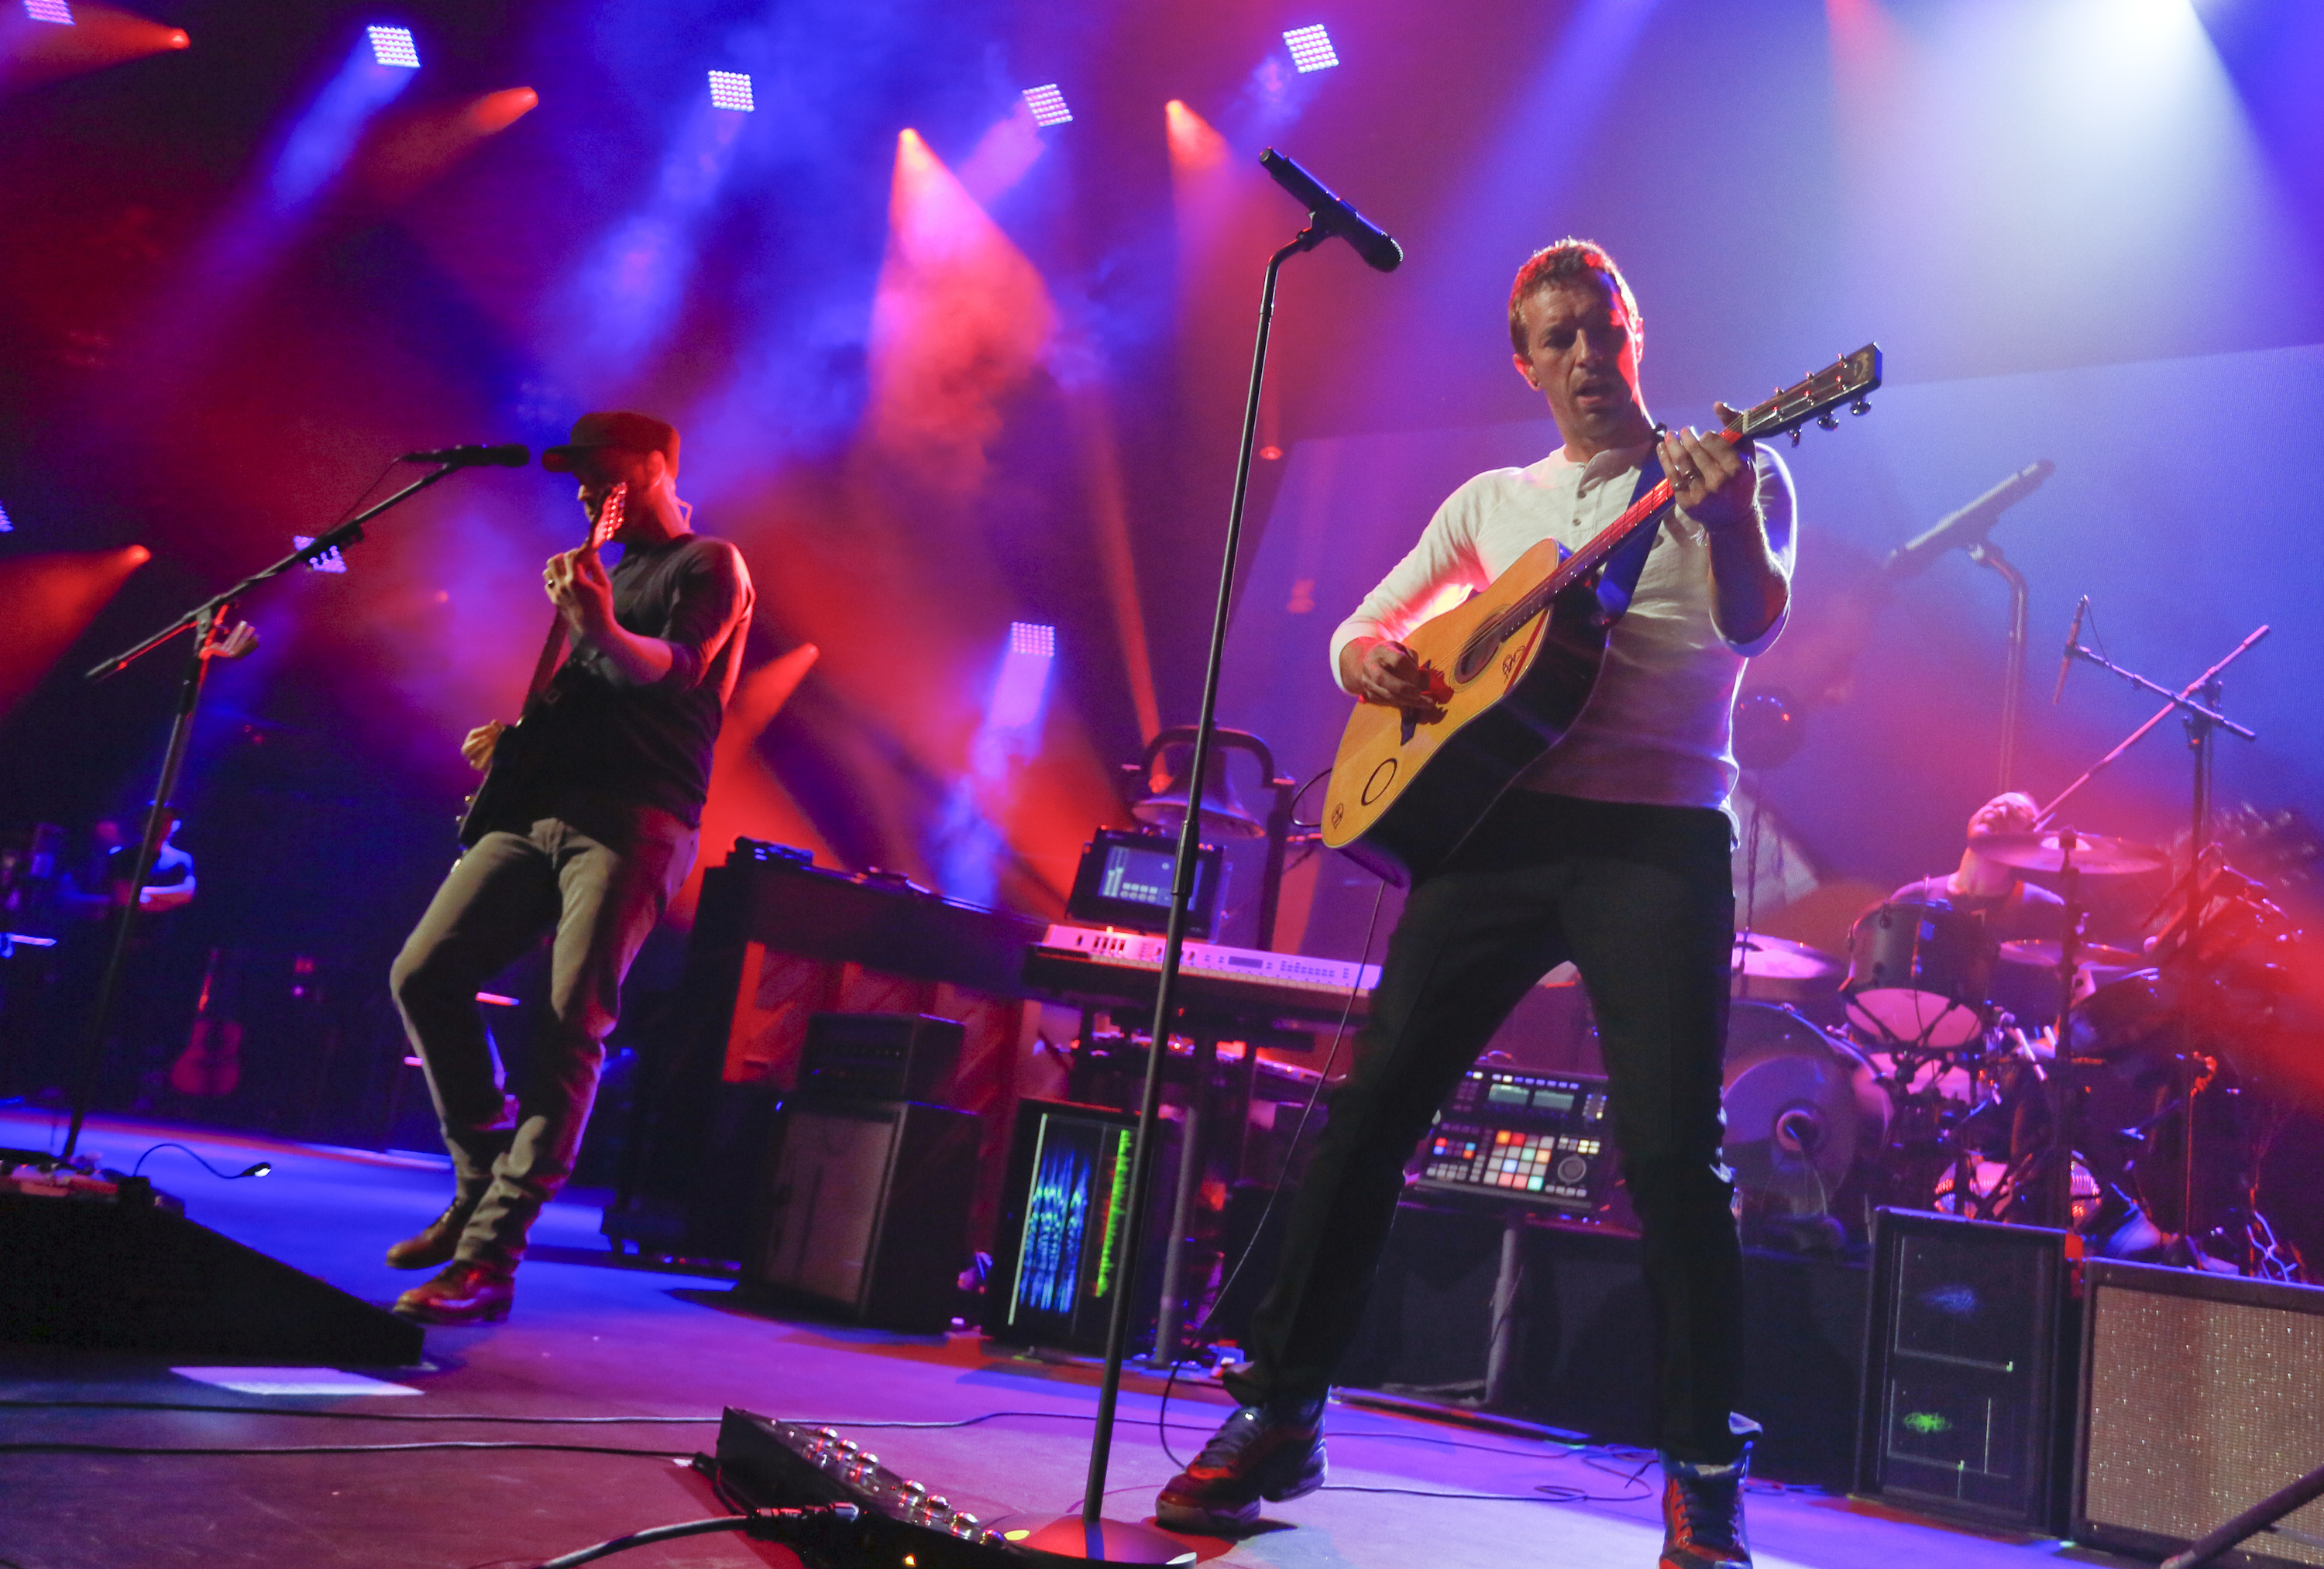 Coldplay will be the headline act in the Super Bowl half-time show. Photo: AP